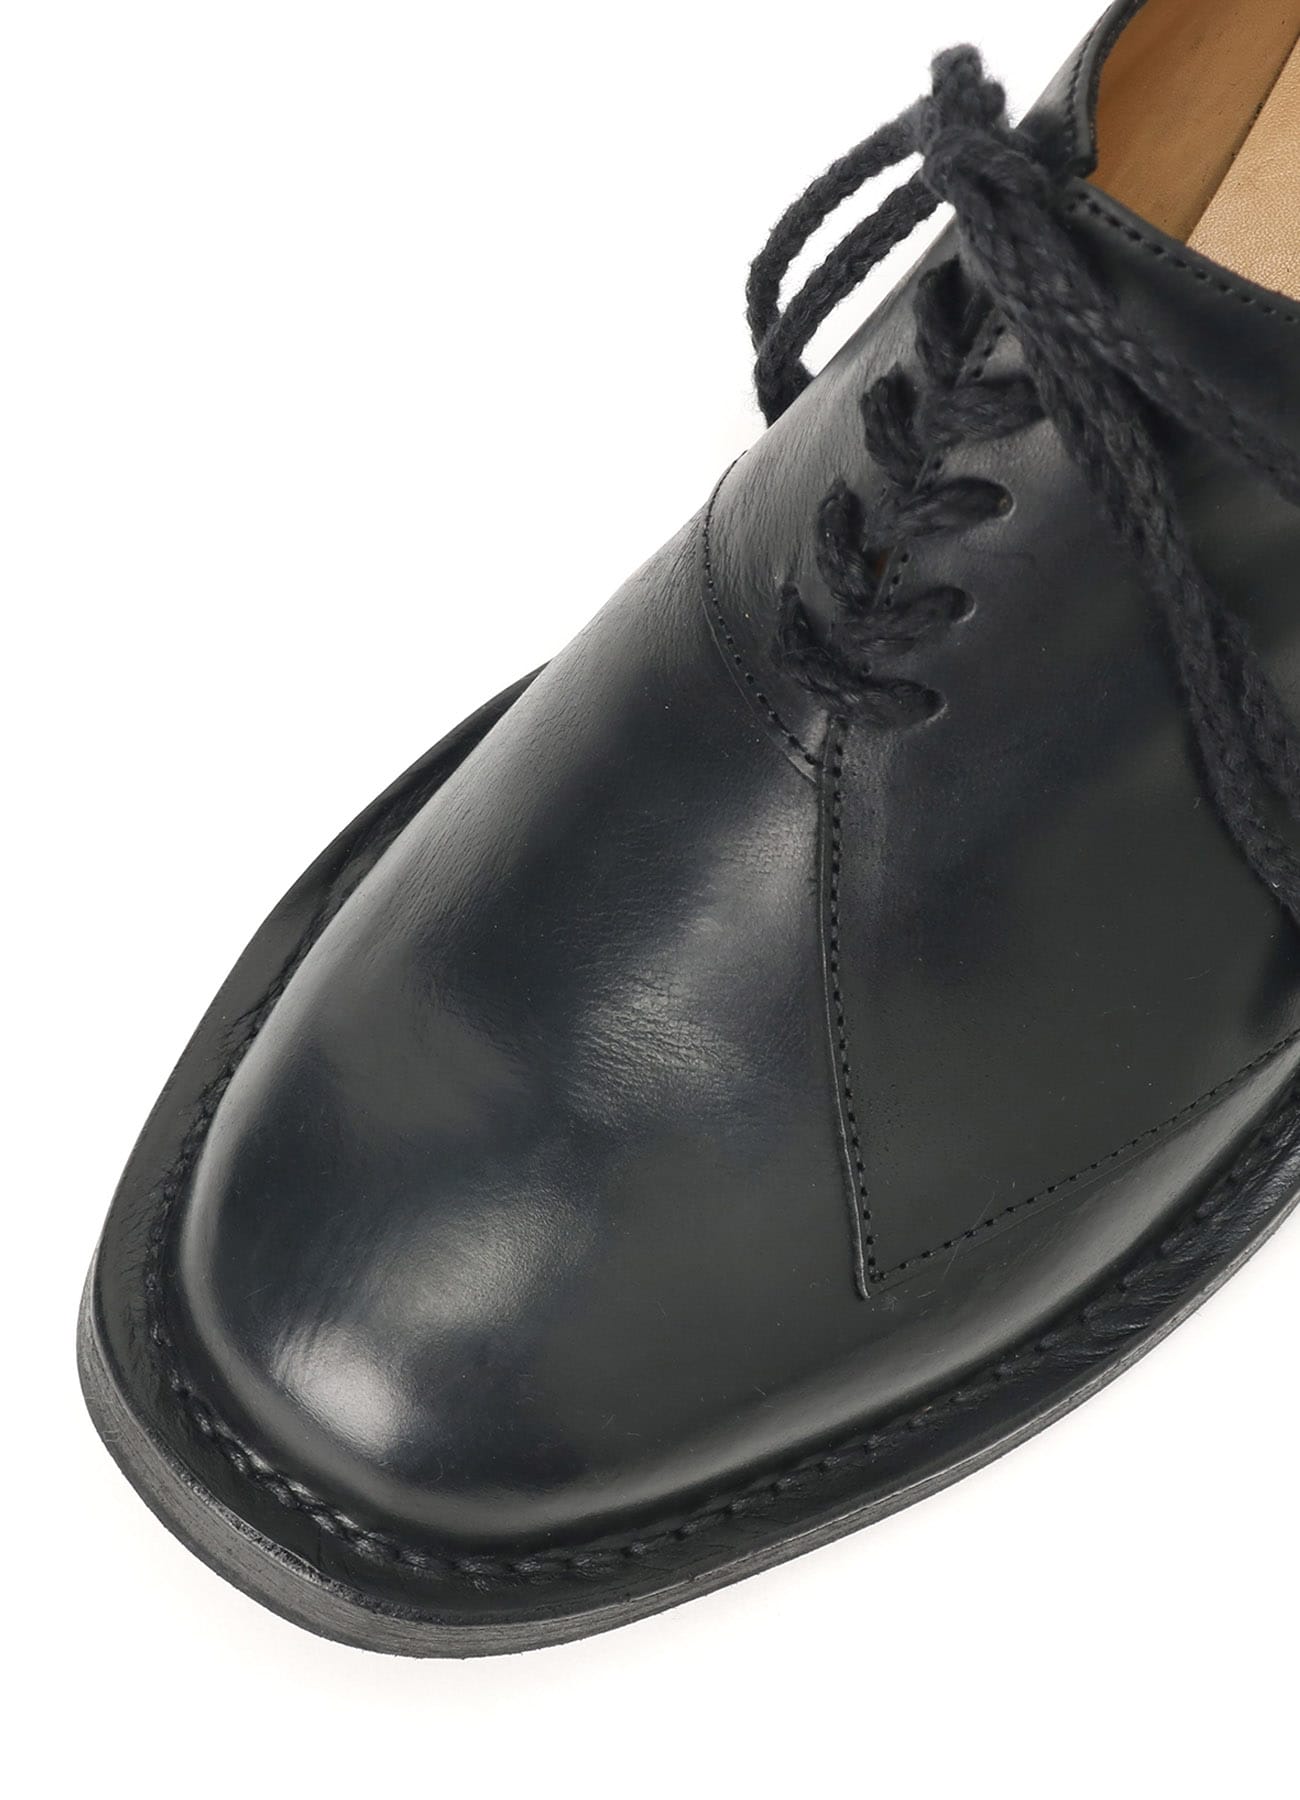 TUMBLED COWHIDE LEATHER DERBY SHOES